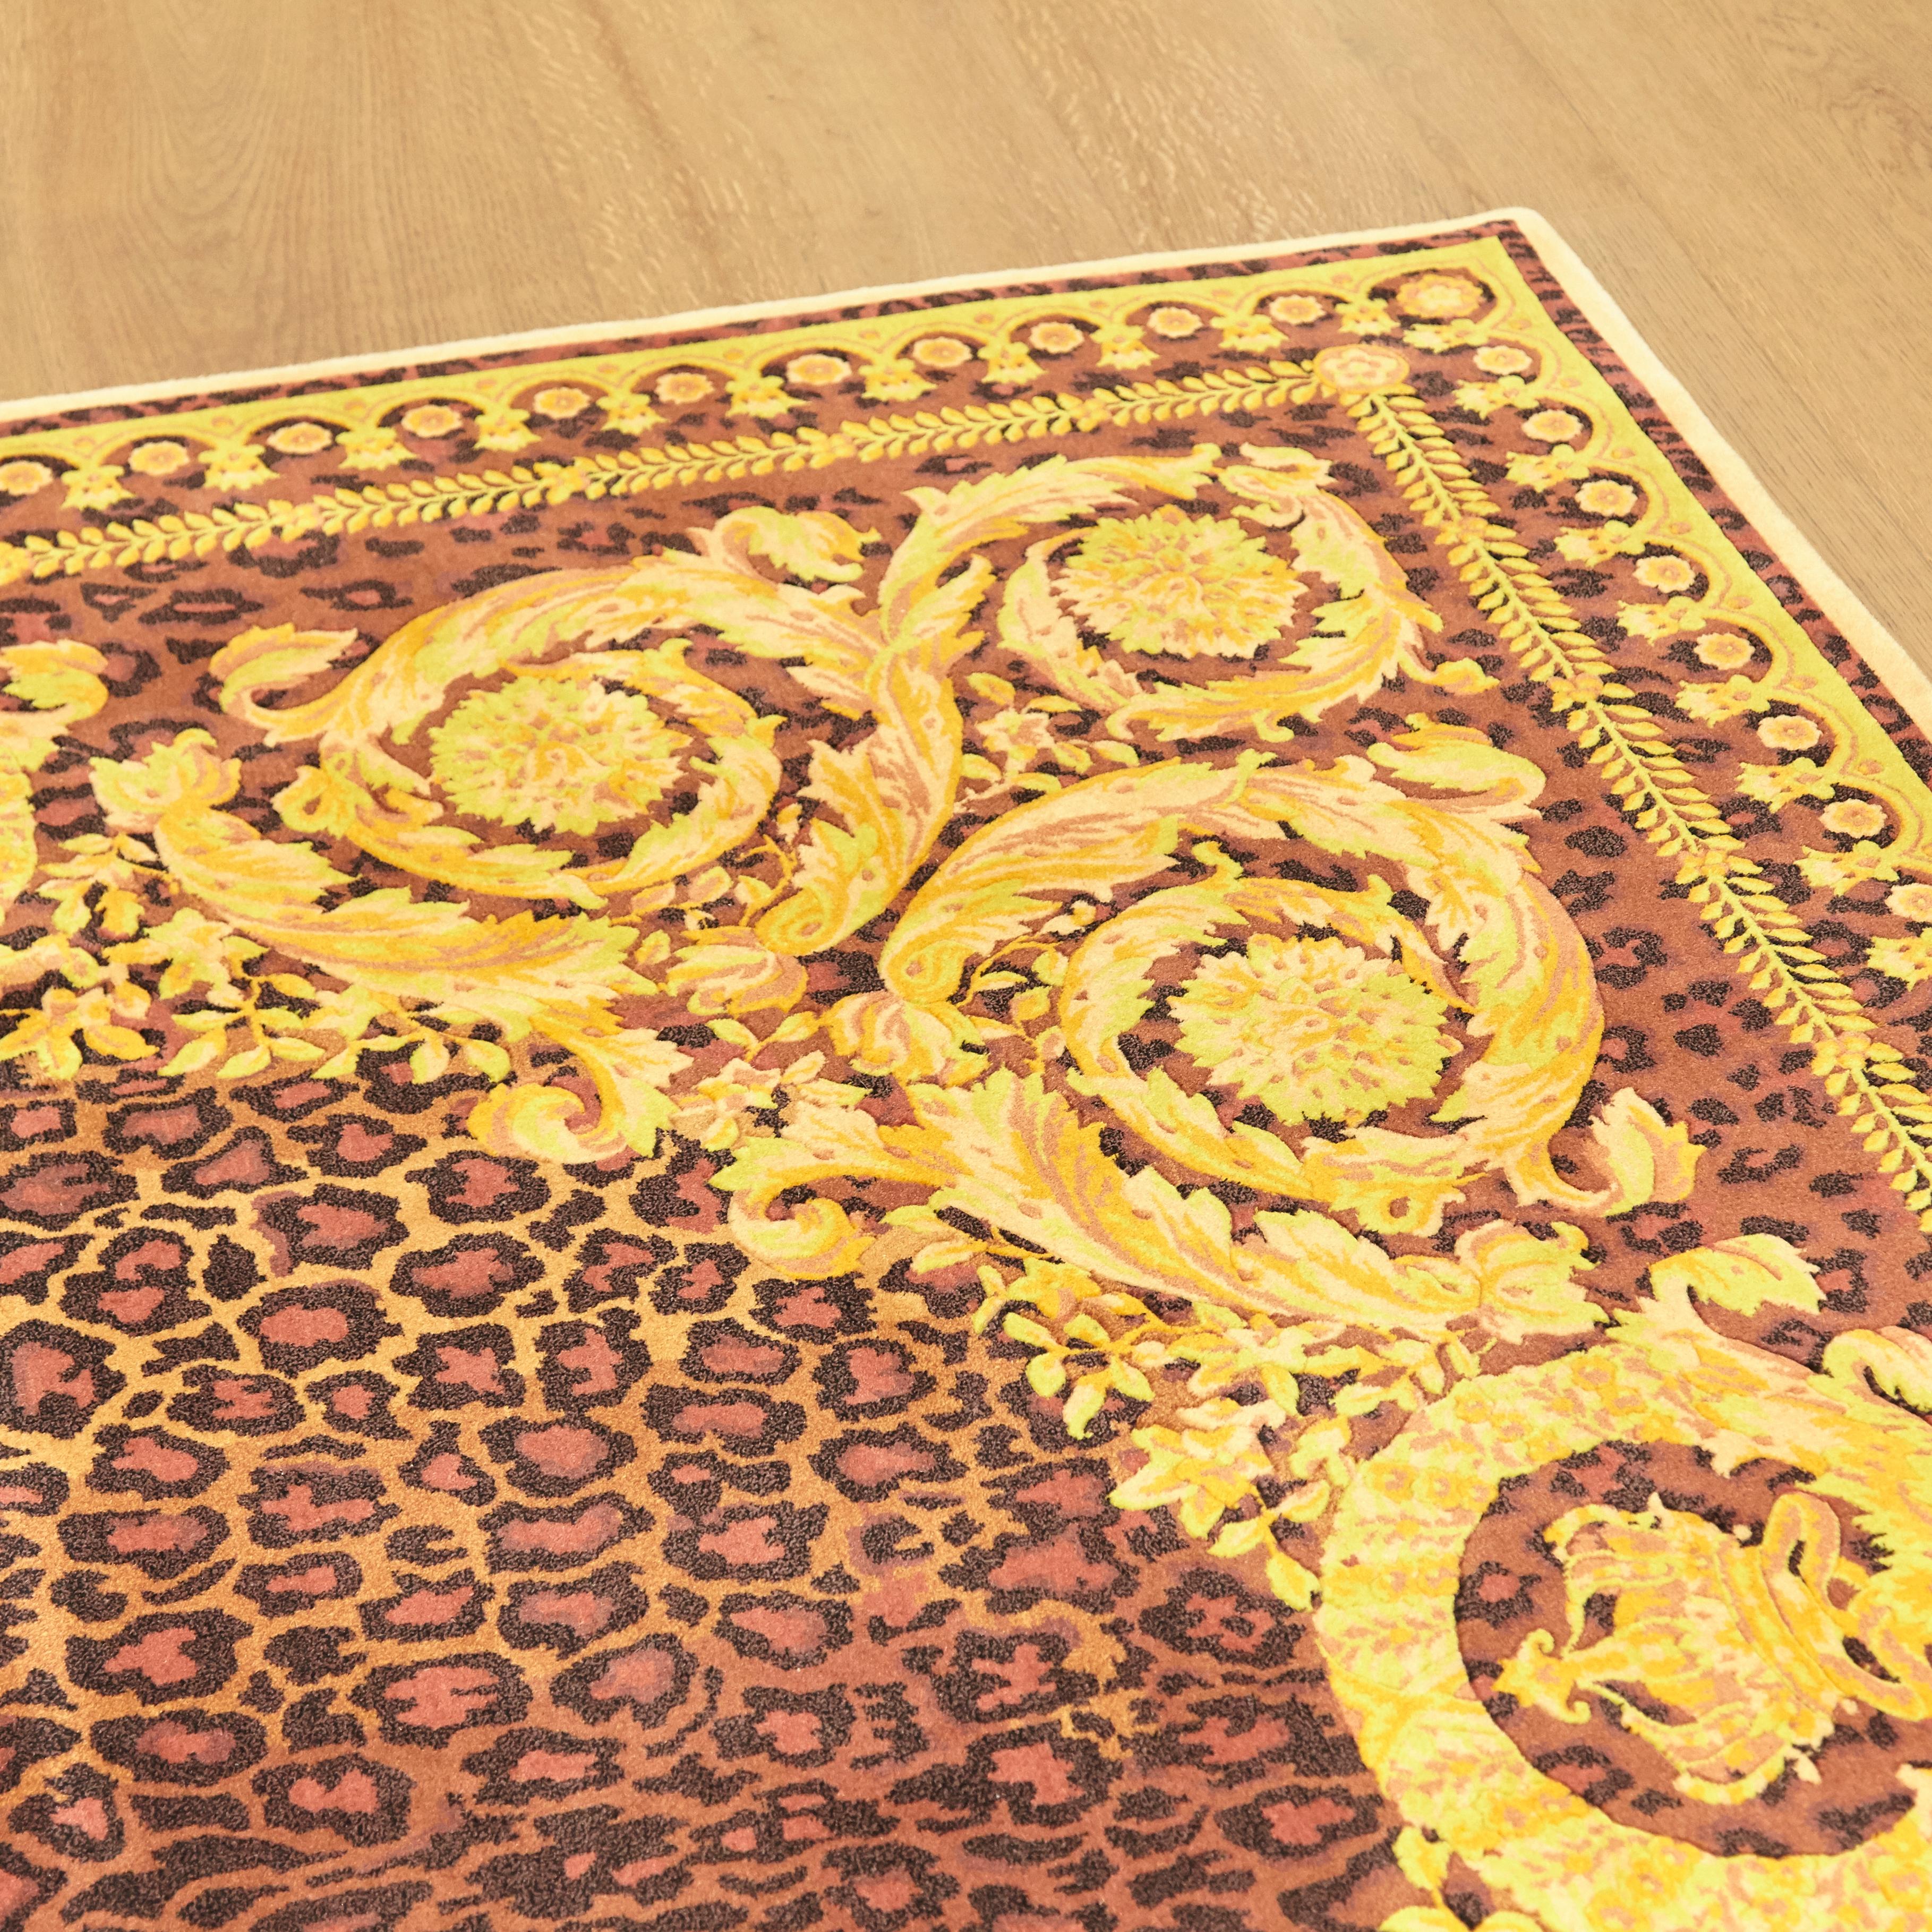 Gianni Versace Collection Rug Wild Barocco, Gold Leopard Animal Print, 1980 2